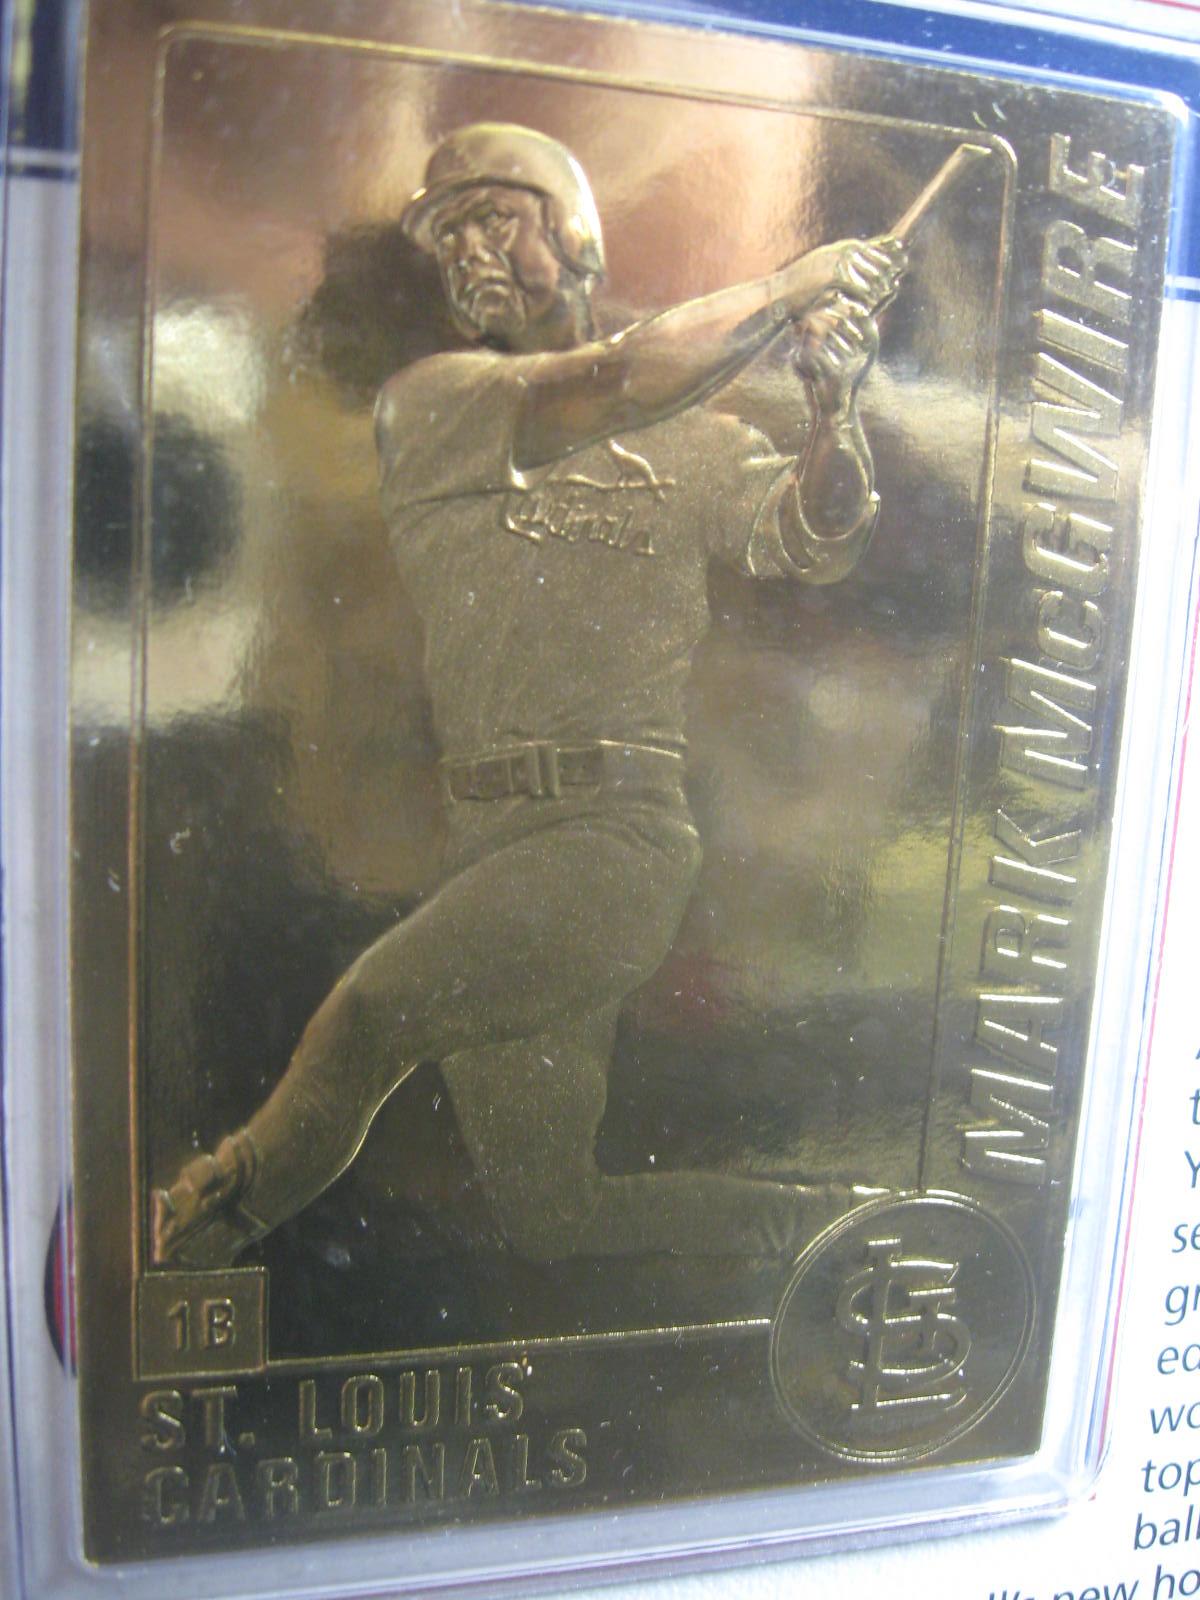 Mark McGwire & Sammy Sosa 1999 New Home Run Records 22K Gold-overlayed Baseball Cards minted by The